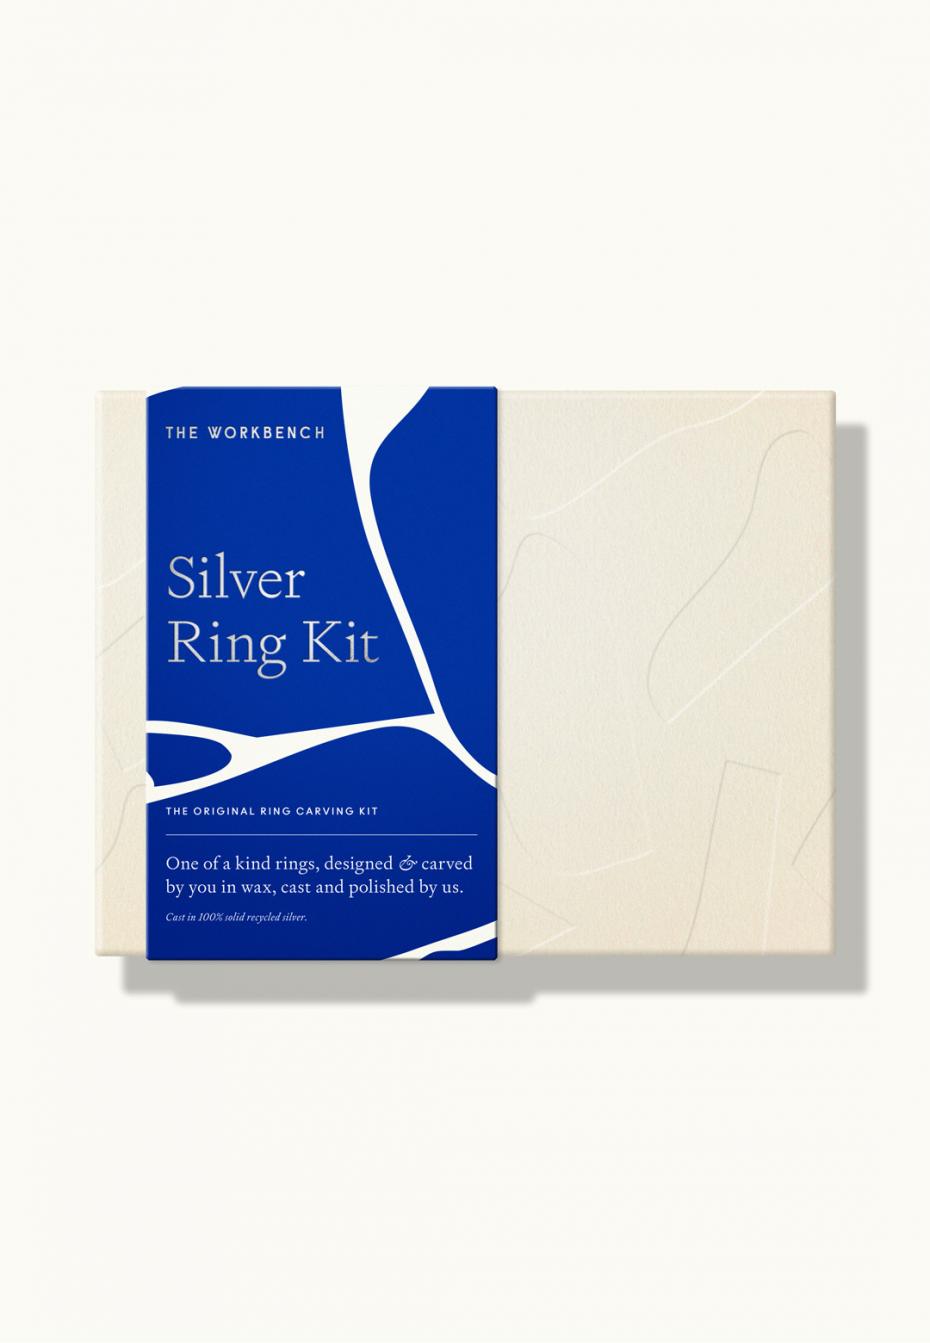 The Silver Ring Kit